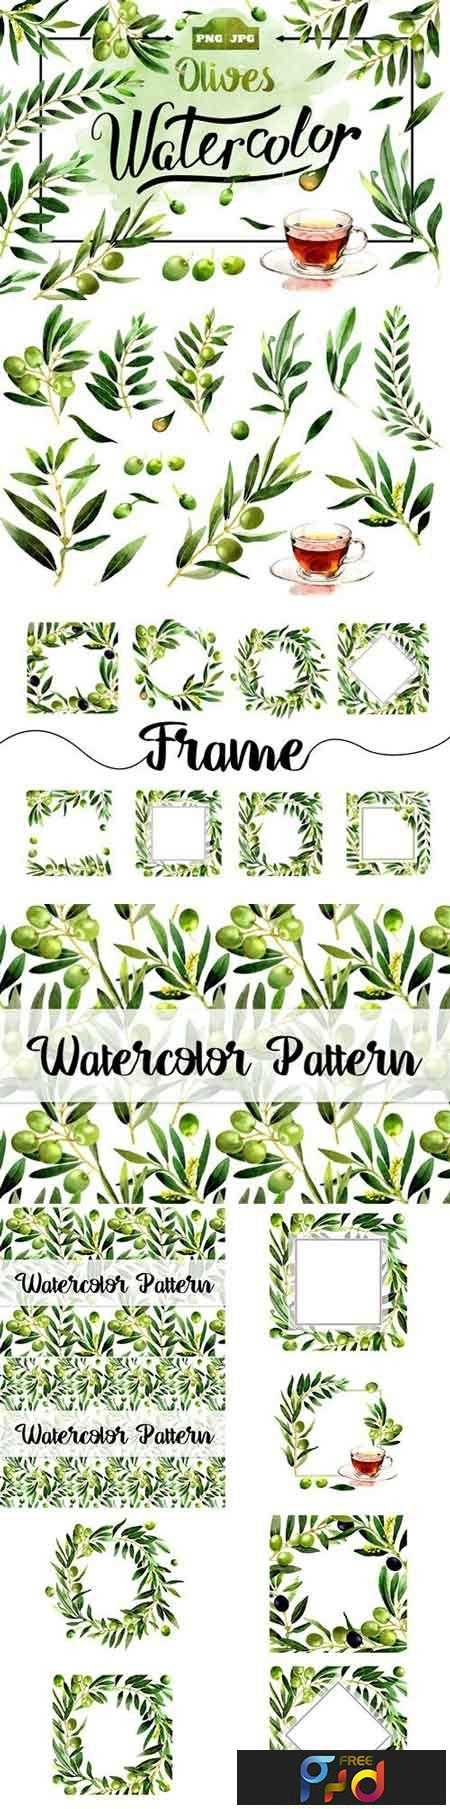 1811285 Olives watercolor PNG clipart 1466479 1